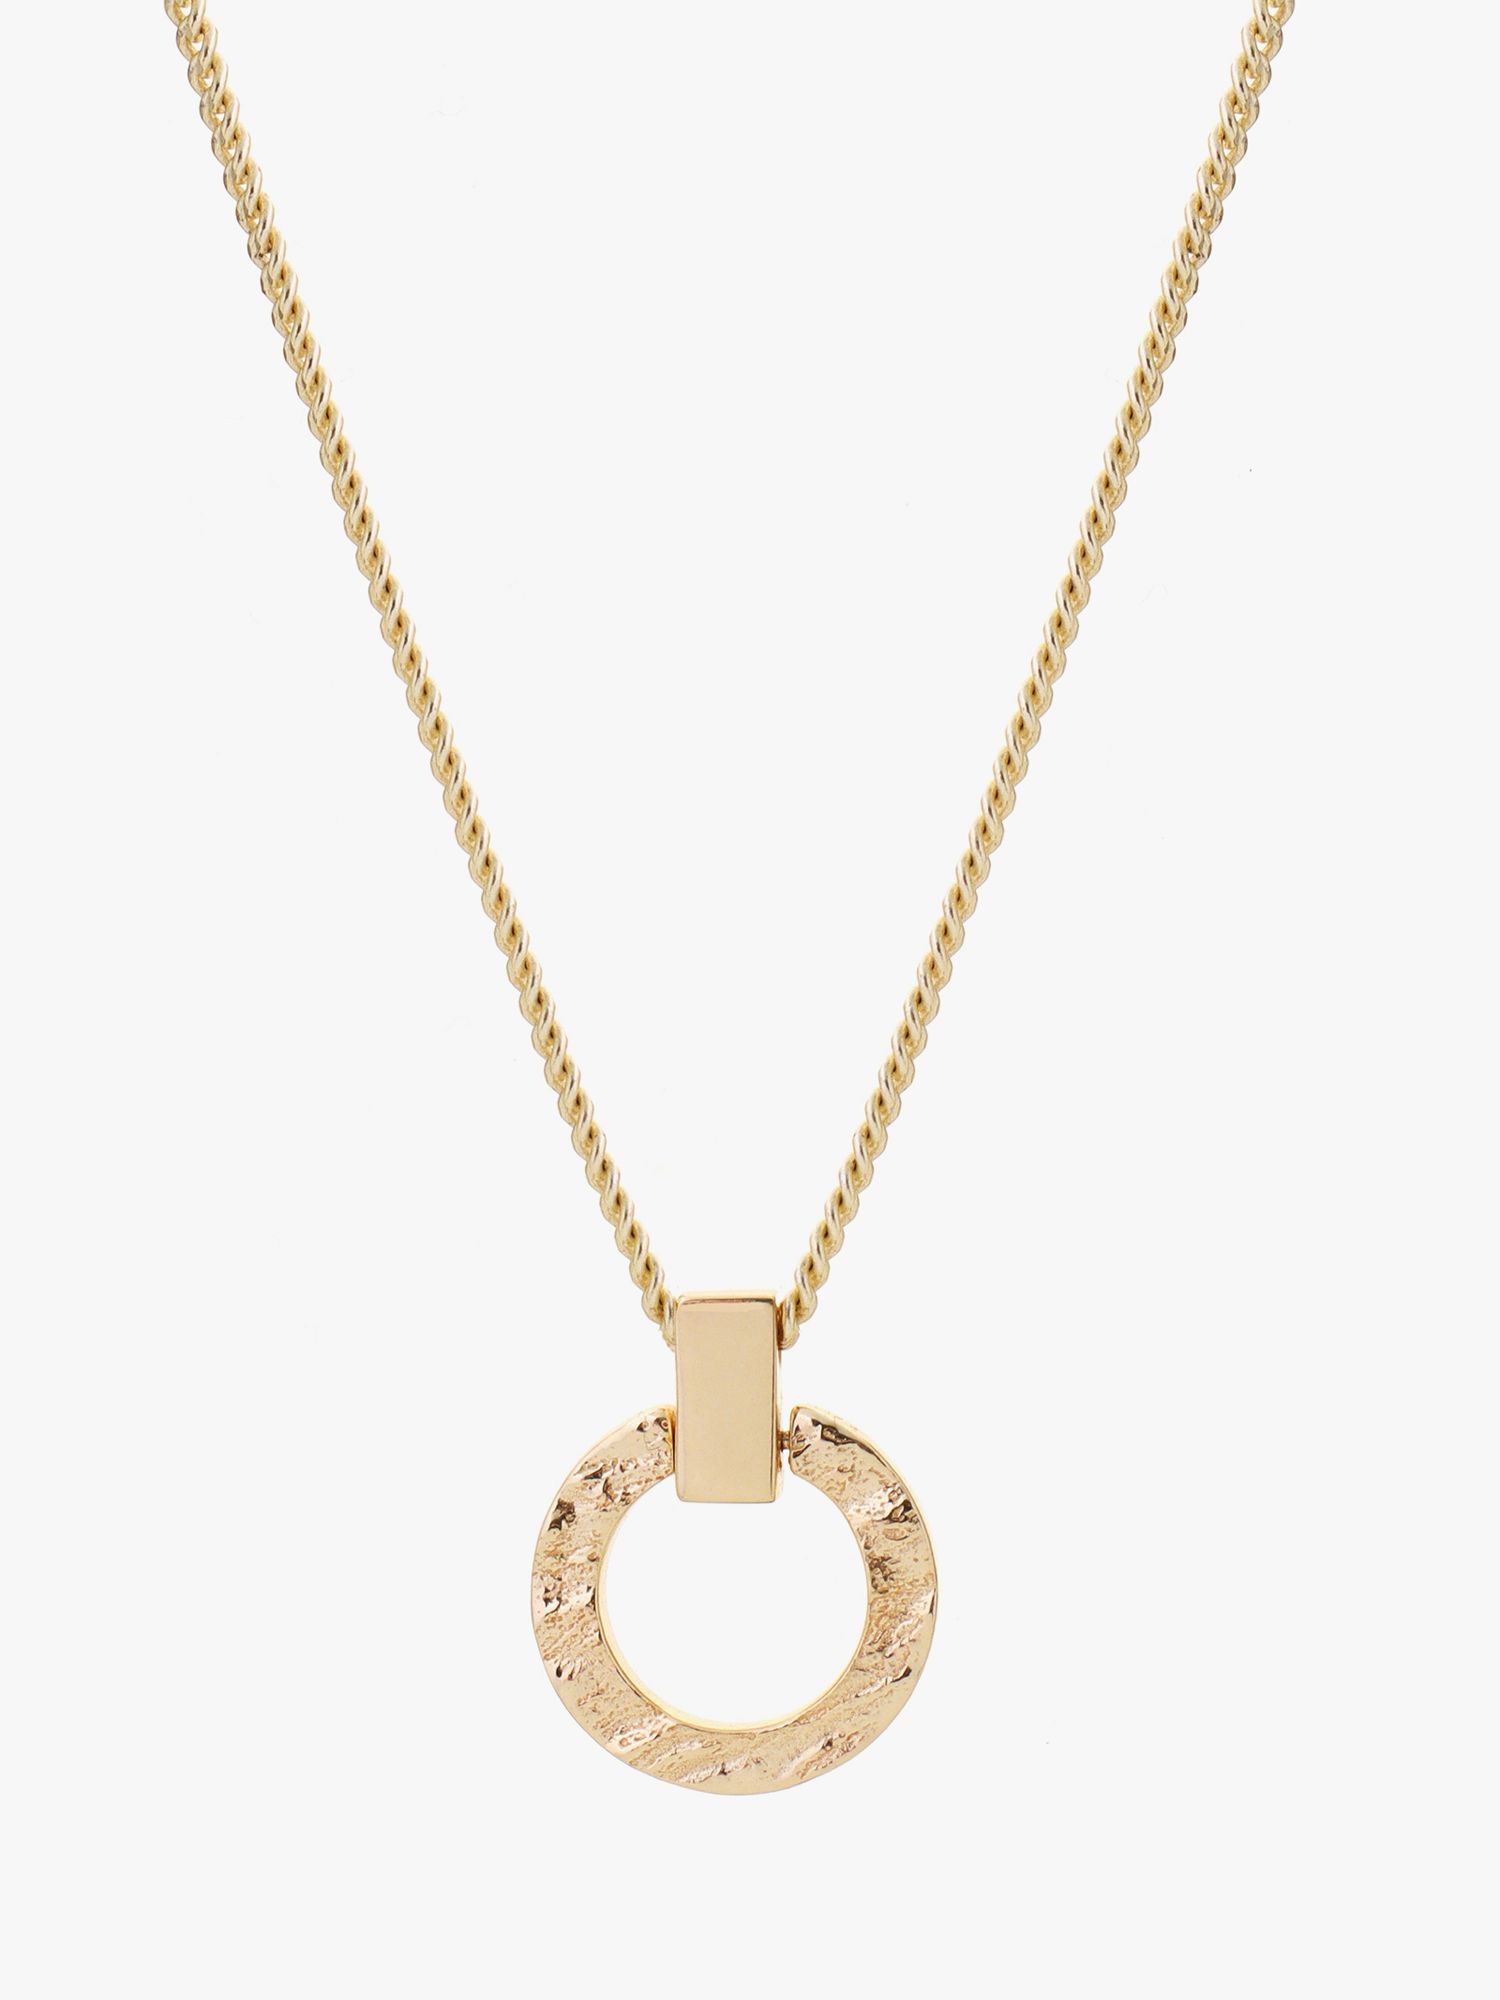 Tutti & Co Palm Collection Textured Circle Pendant Necklace, Gold